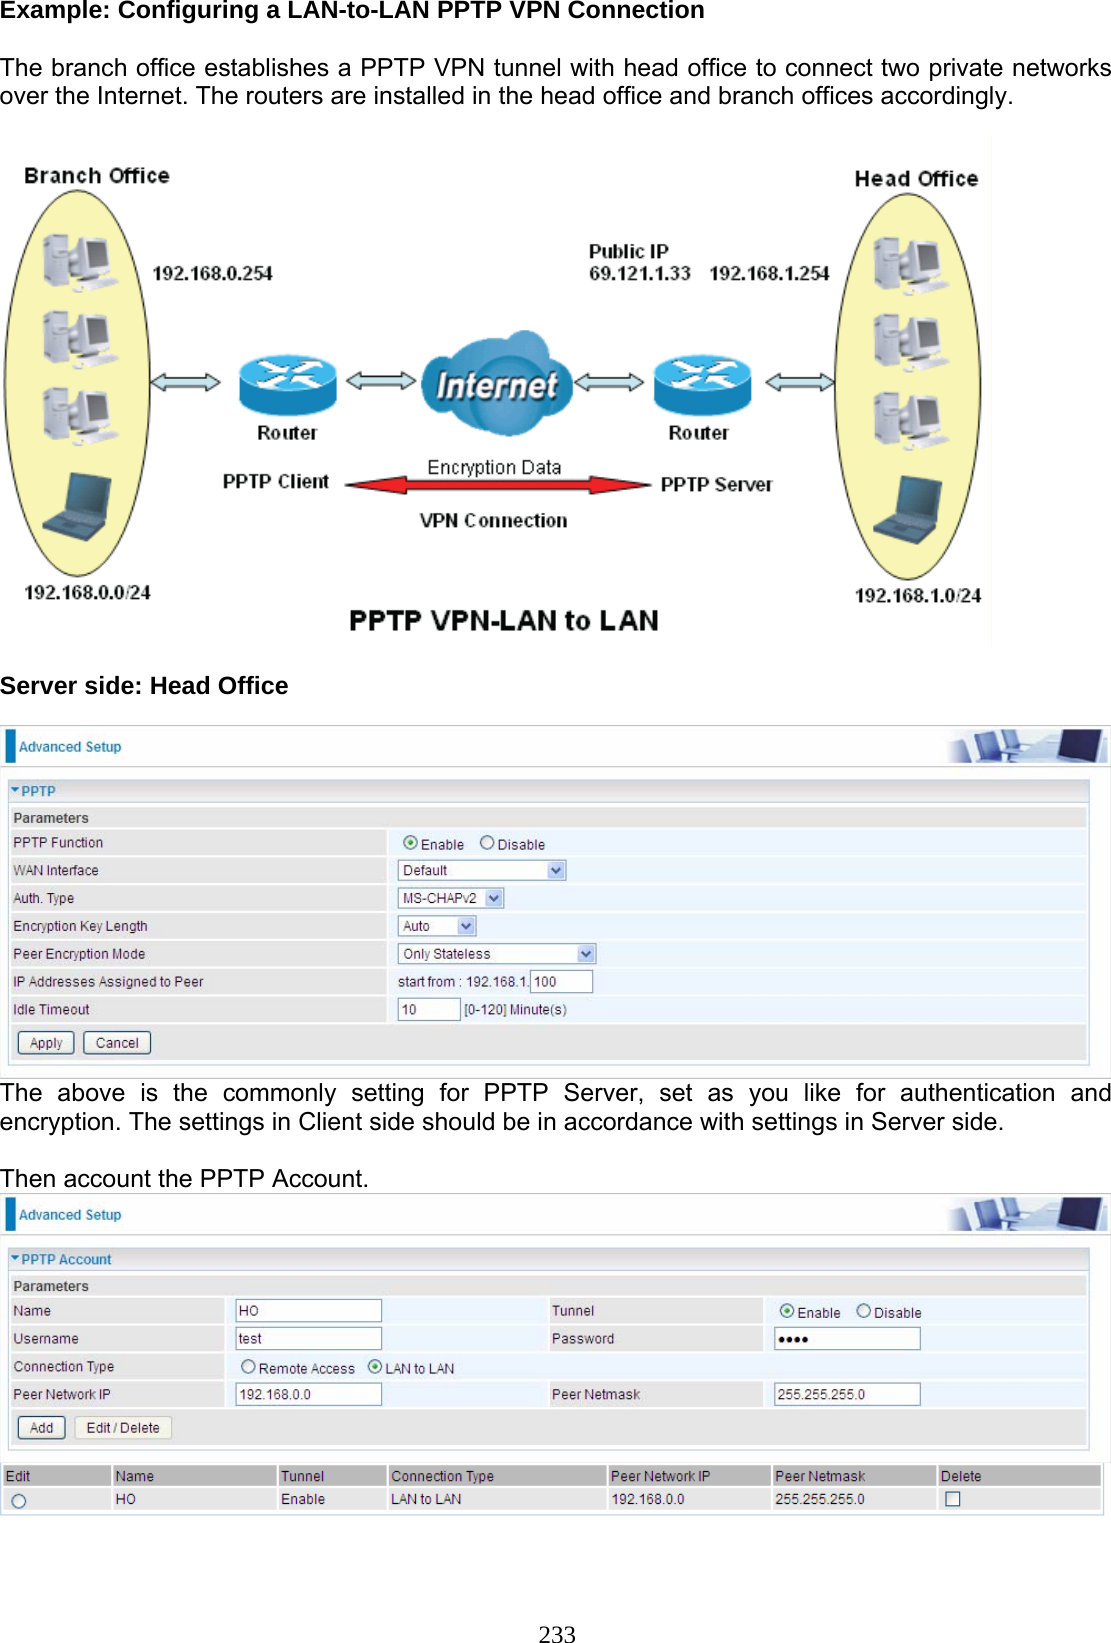 233 Example: Configuring a LAN-to-LAN PPTP VPN Connection  The branch office establishes a PPTP VPN tunnel with head office to connect two private networks over the Internet. The routers are installed in the head office and branch offices accordingly.    Server side: Head Office   The above is the commonly setting for PPTP Server, set as you like for authentication and encryption. The settings in Client side should be in accordance with settings in Server side.  Then account the PPTP Account.       